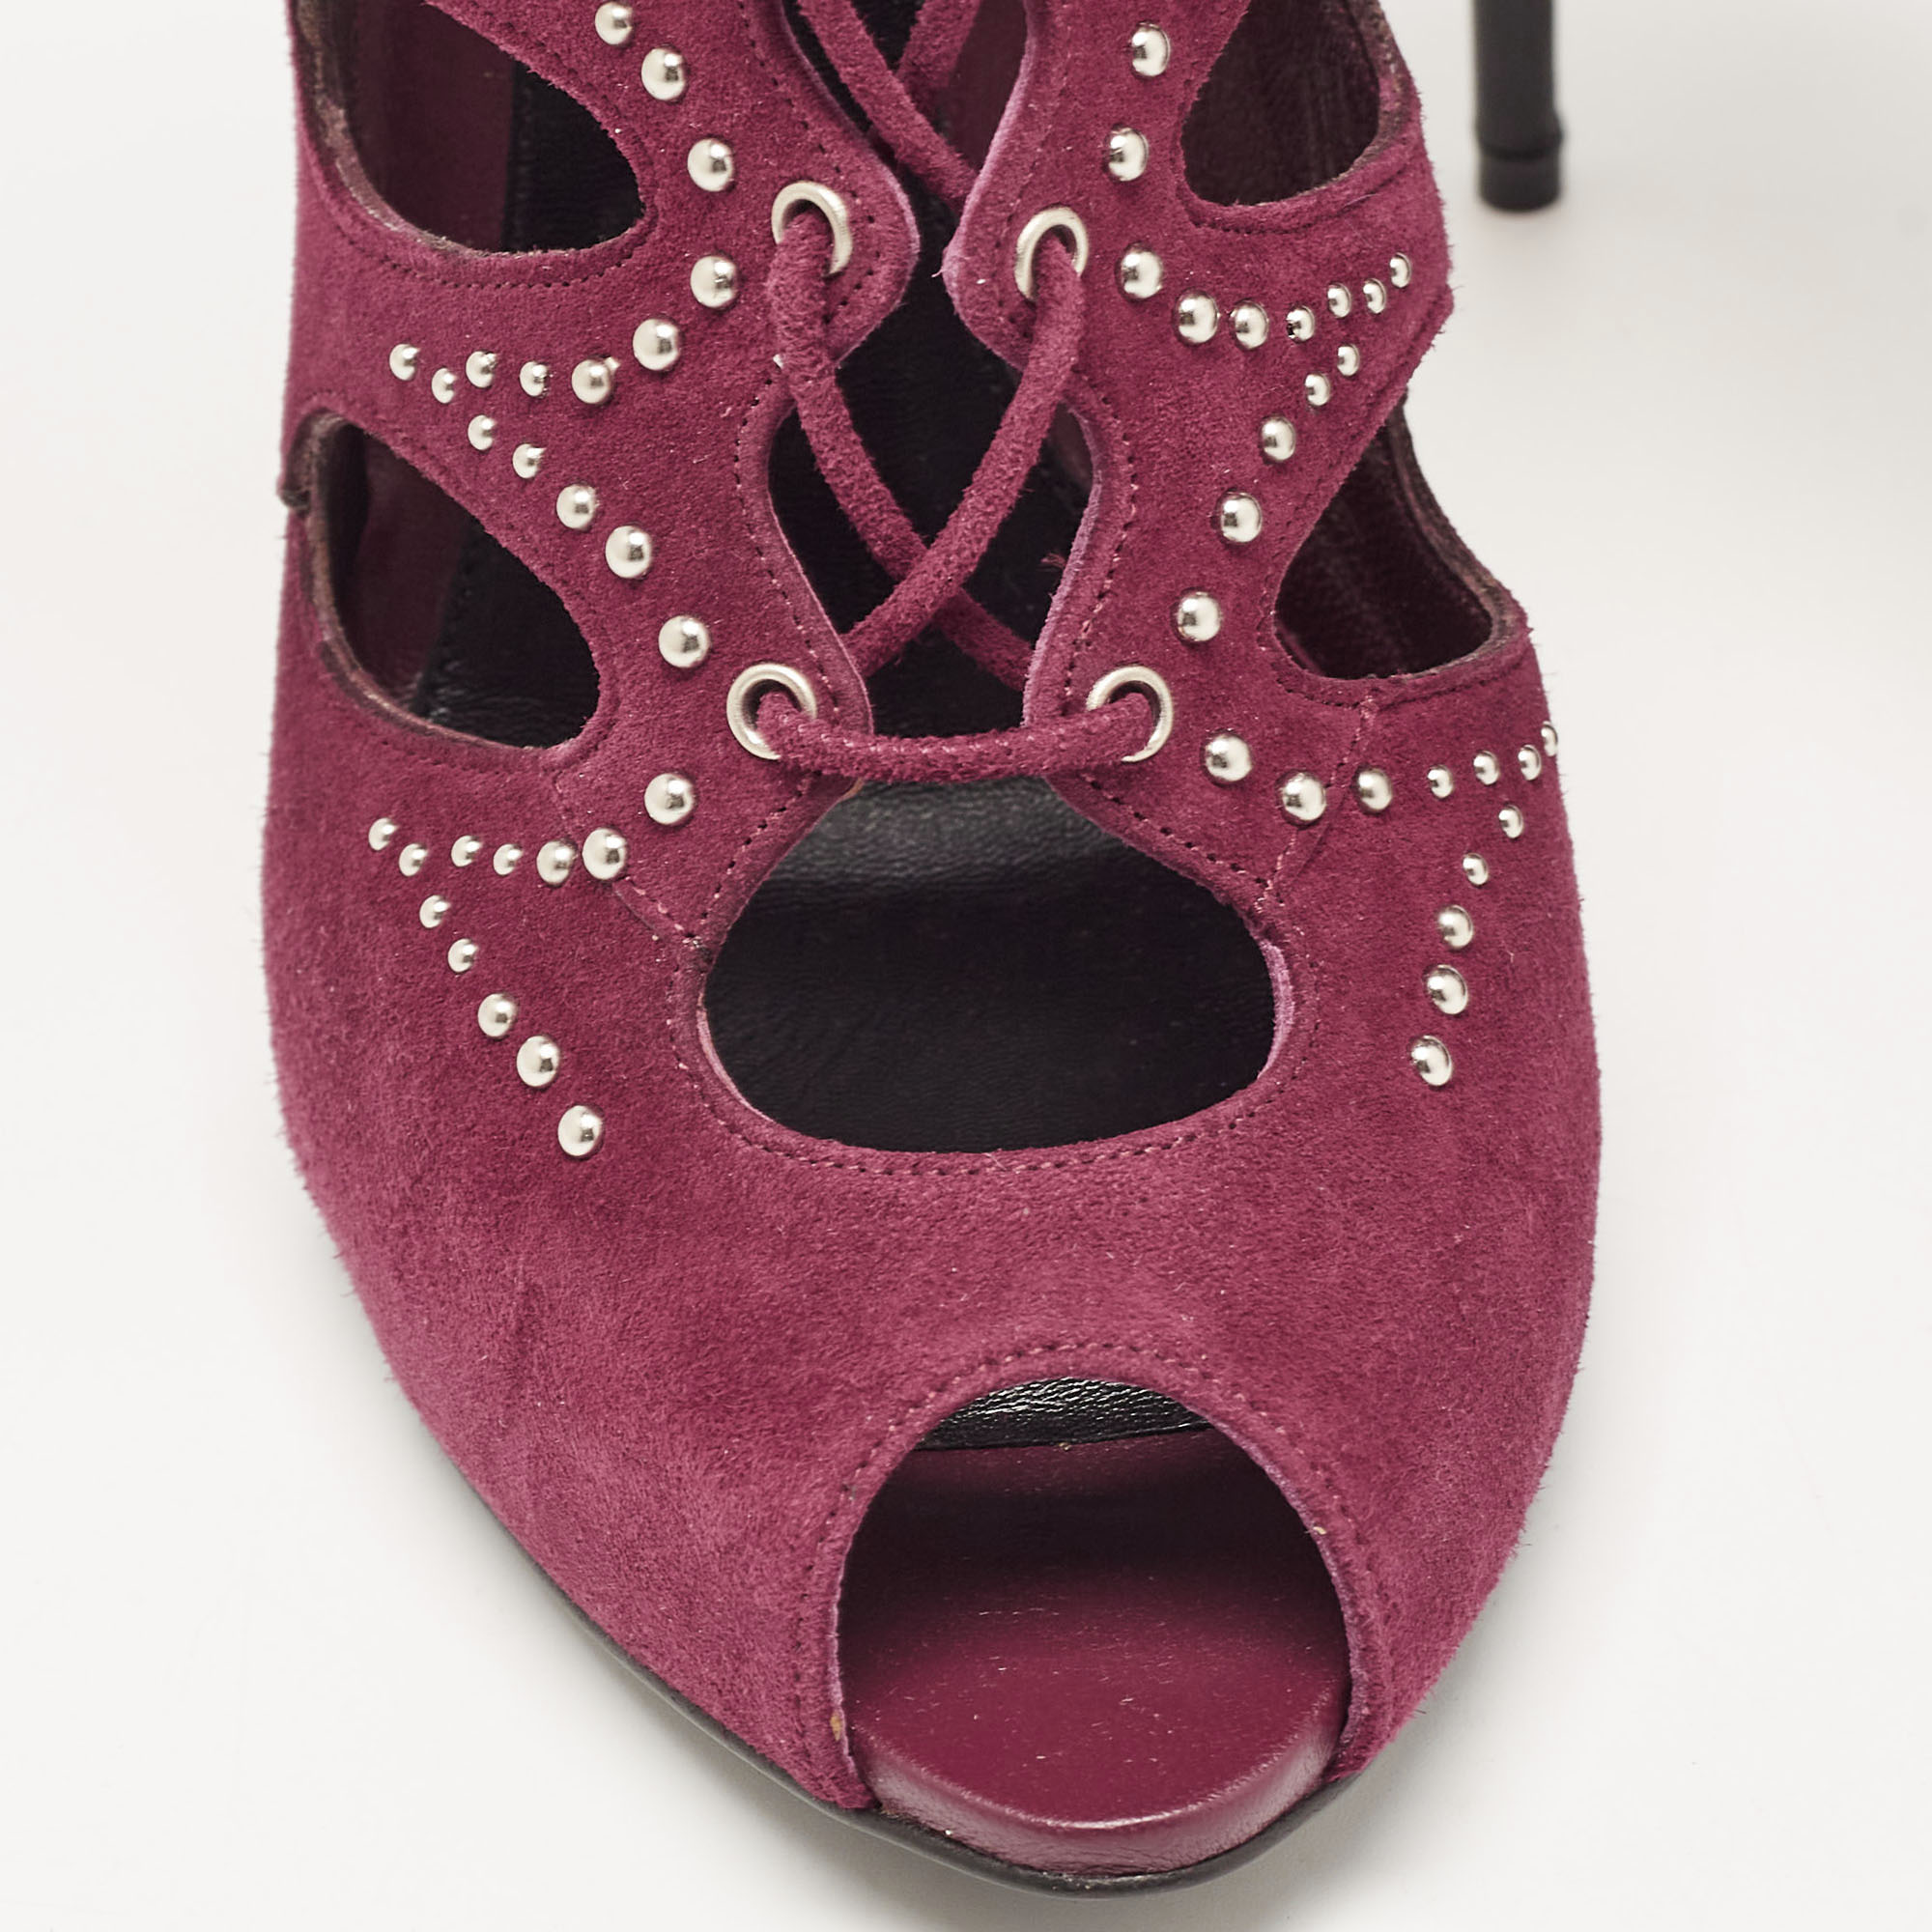 Alexander McQueen Burgundy Suede Cut Out Studded Sandals Size 37